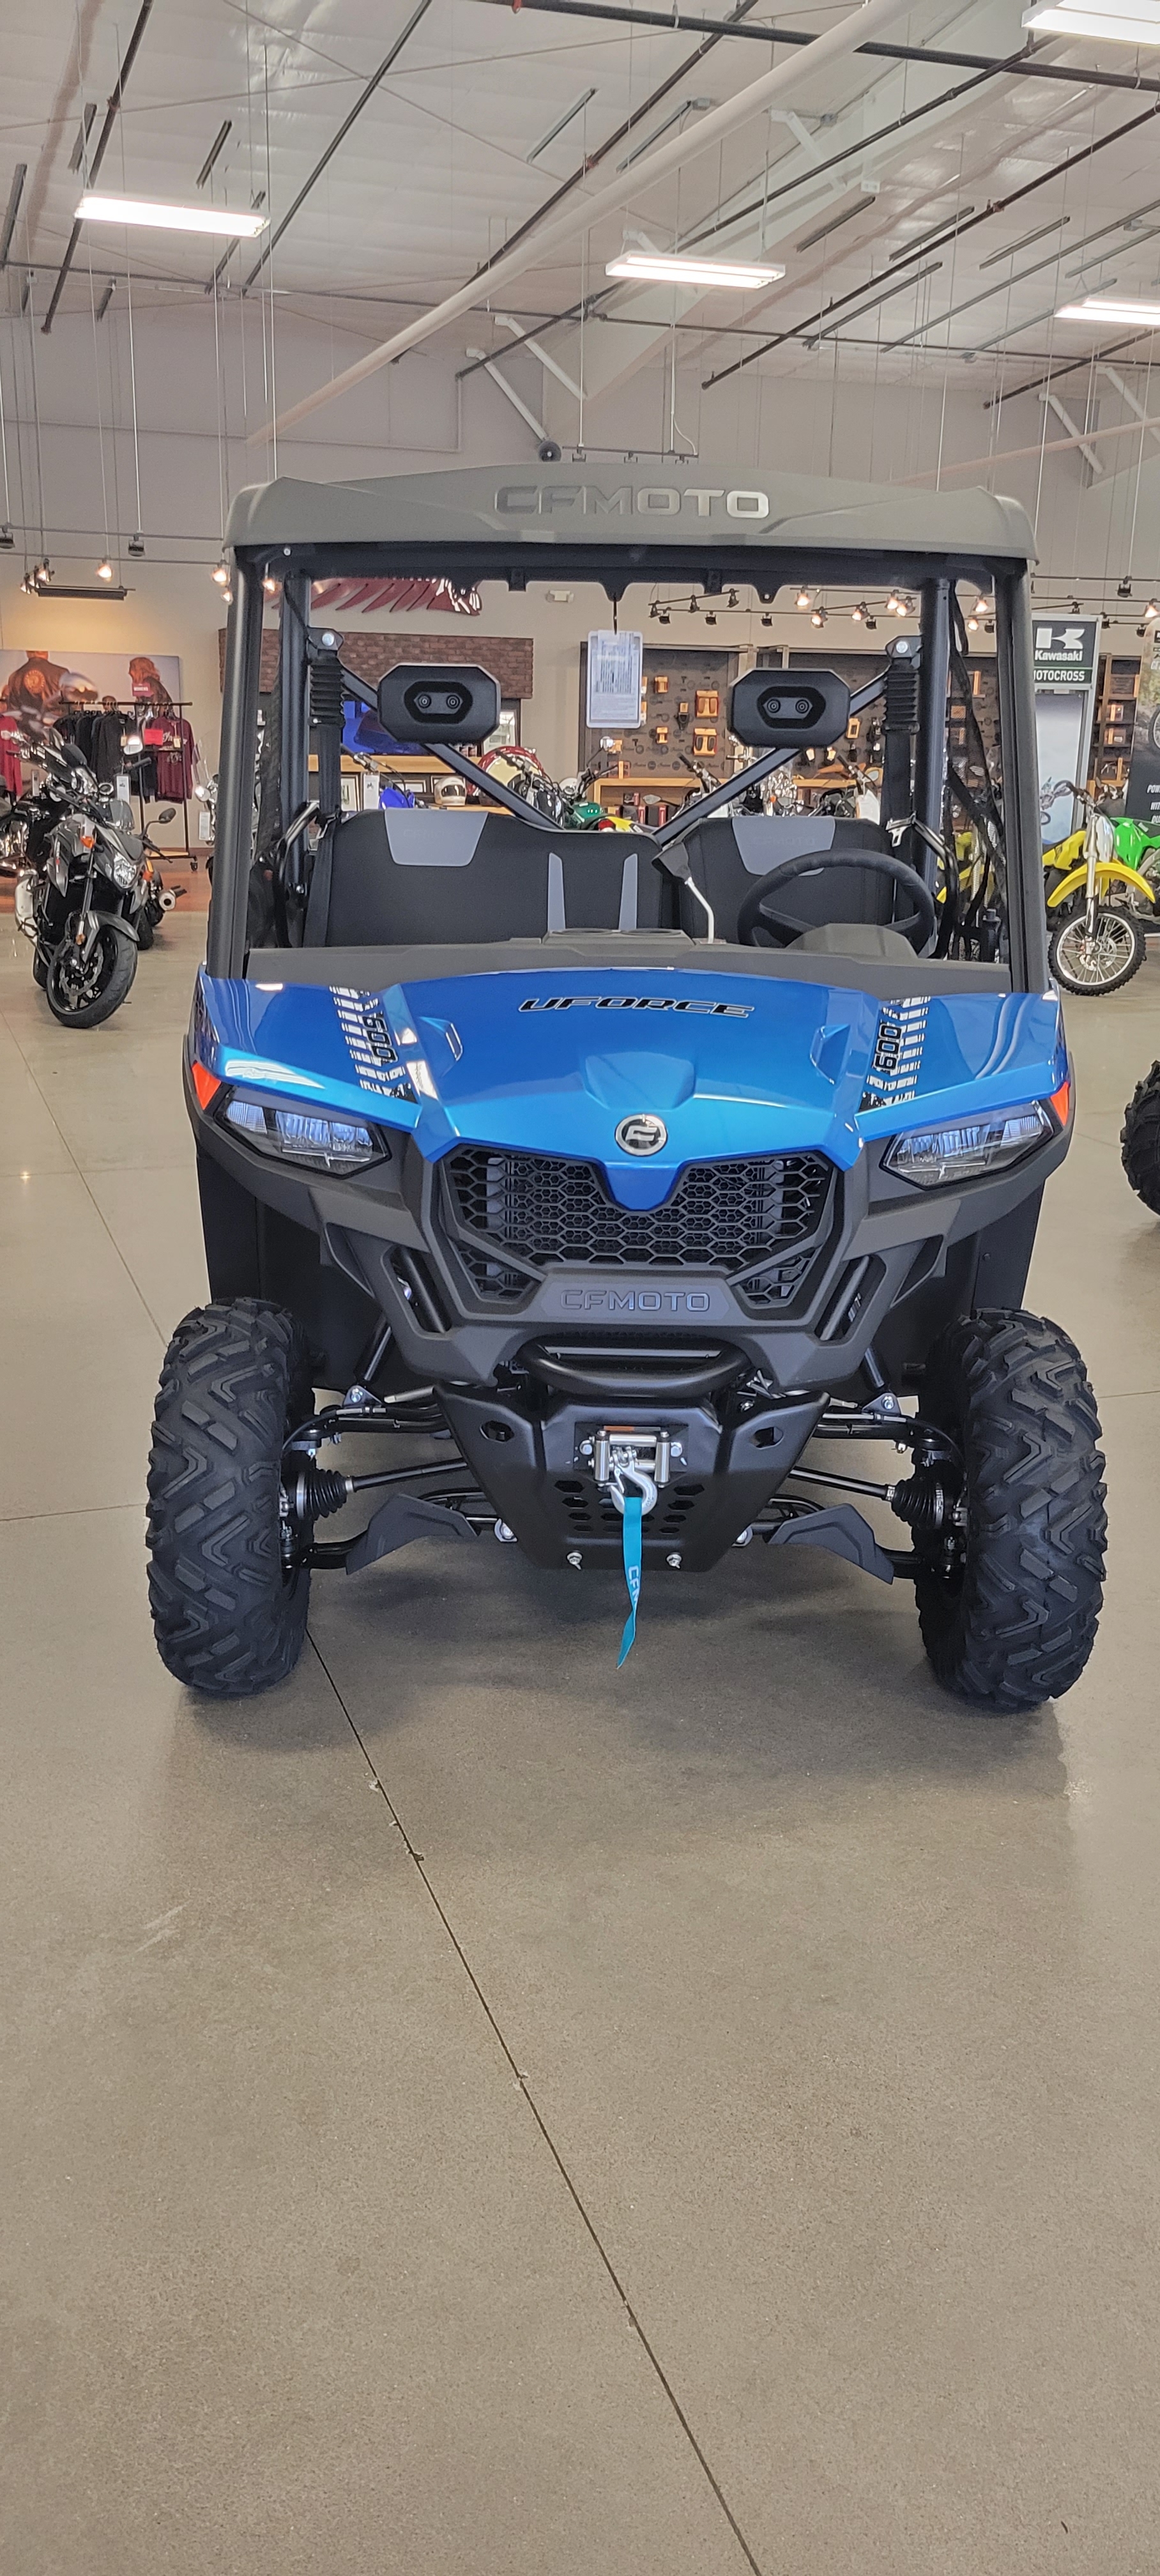 2022 CFMOTO UFORCE 600 at Brenny's Motorcycle Clinic, Bettendorf, IA 52722